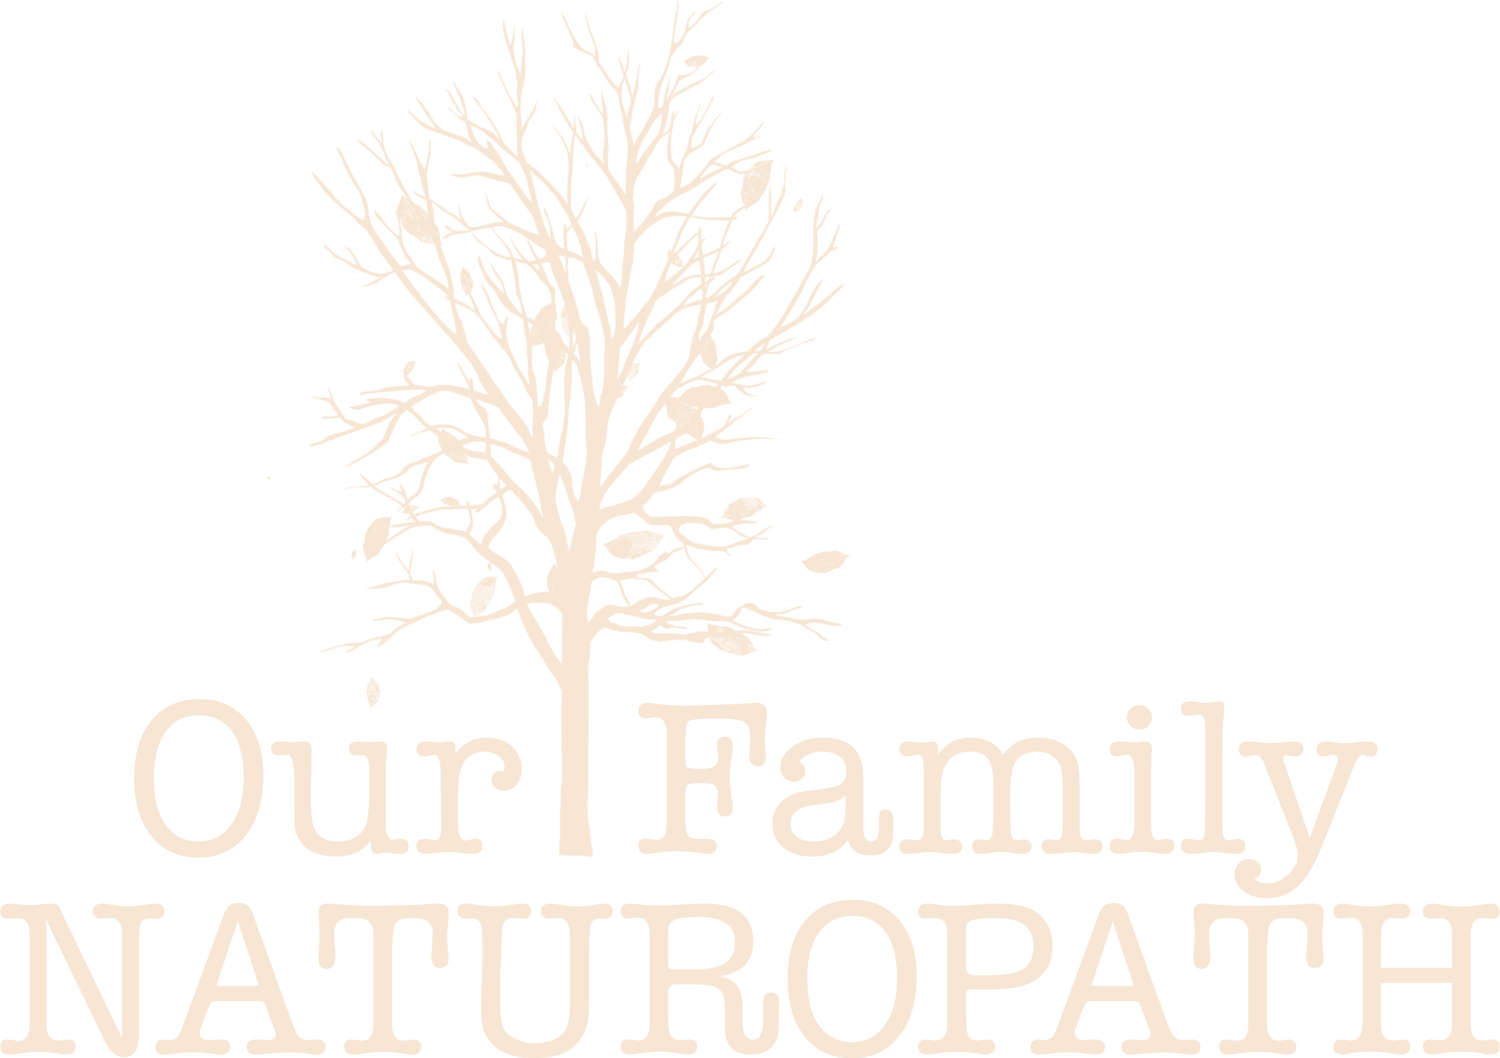 Our Family Naturopath